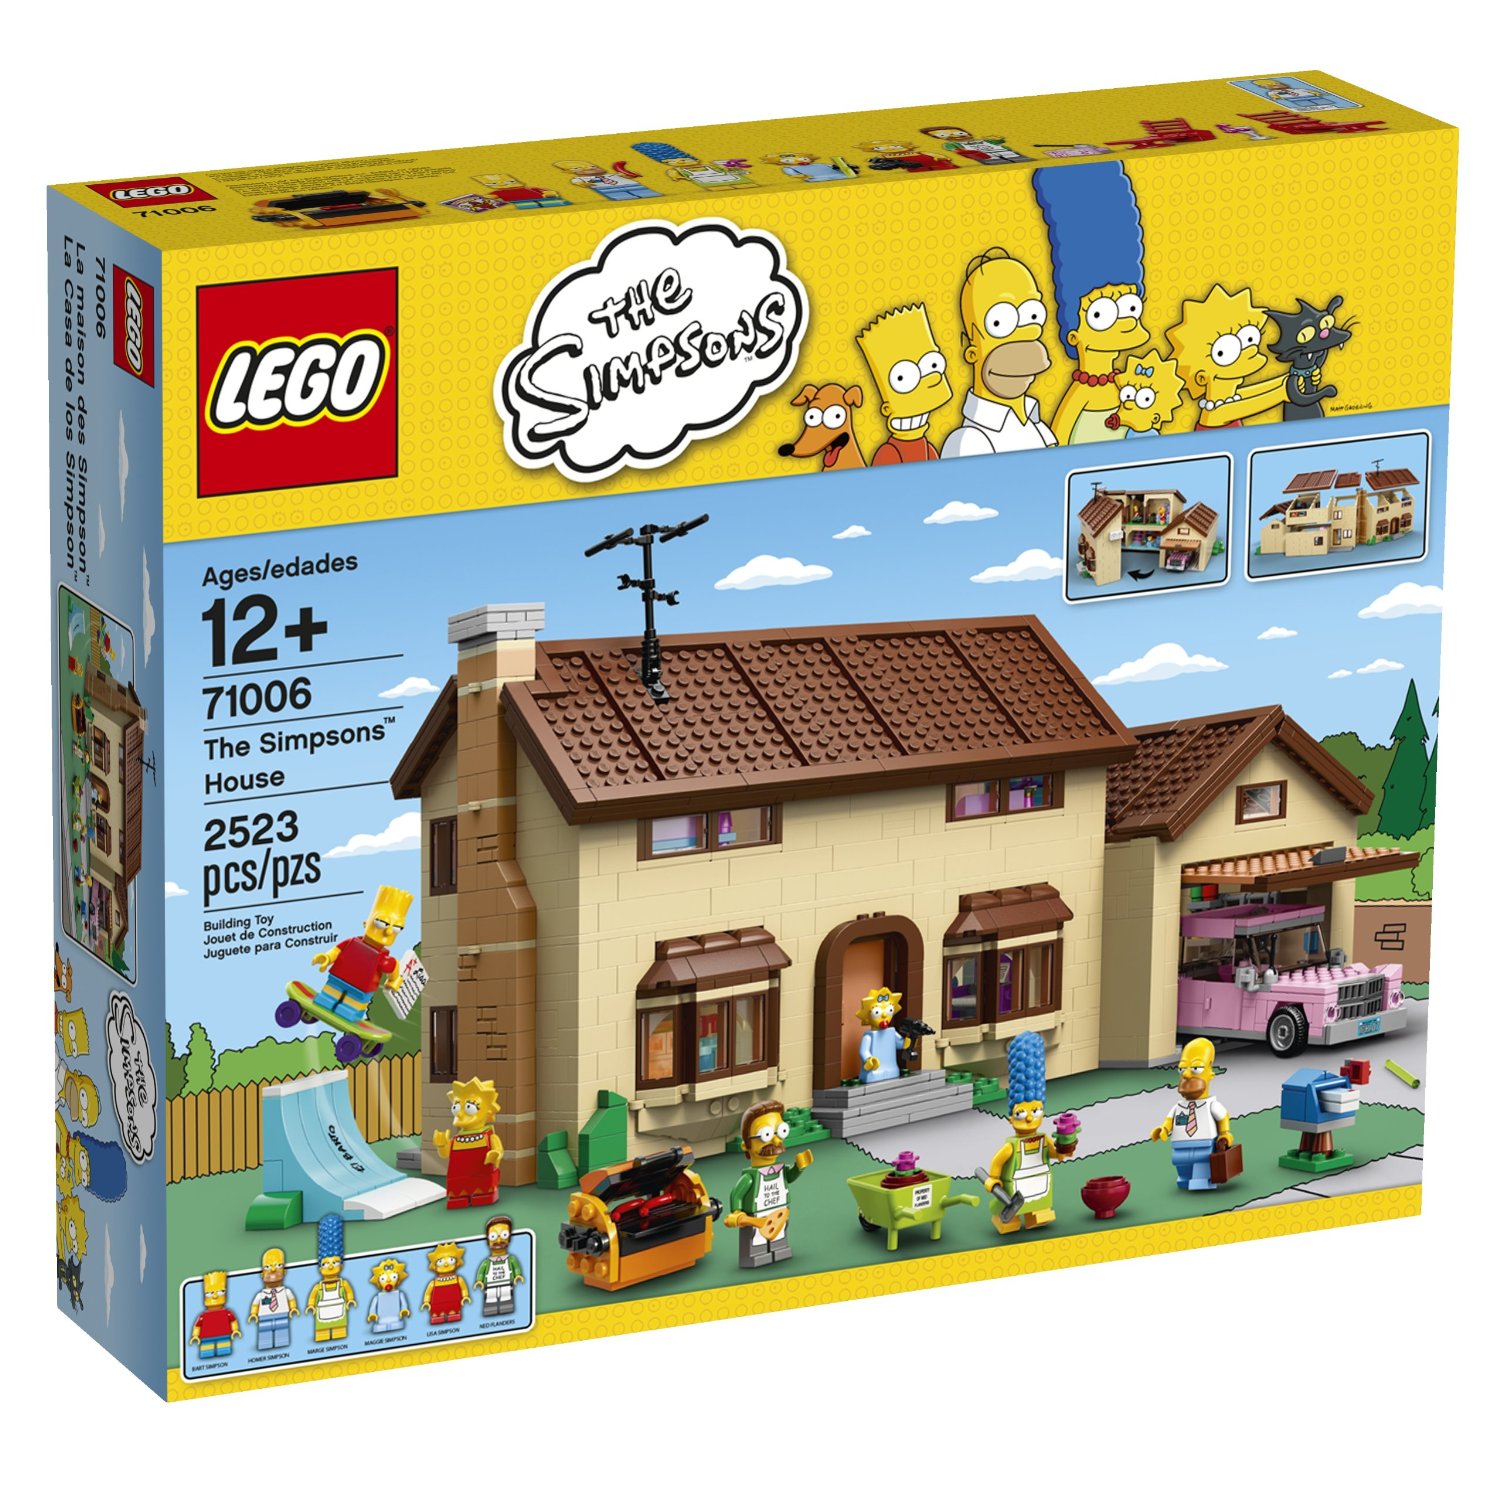 LEGO The Simpsons house / Boing Boing